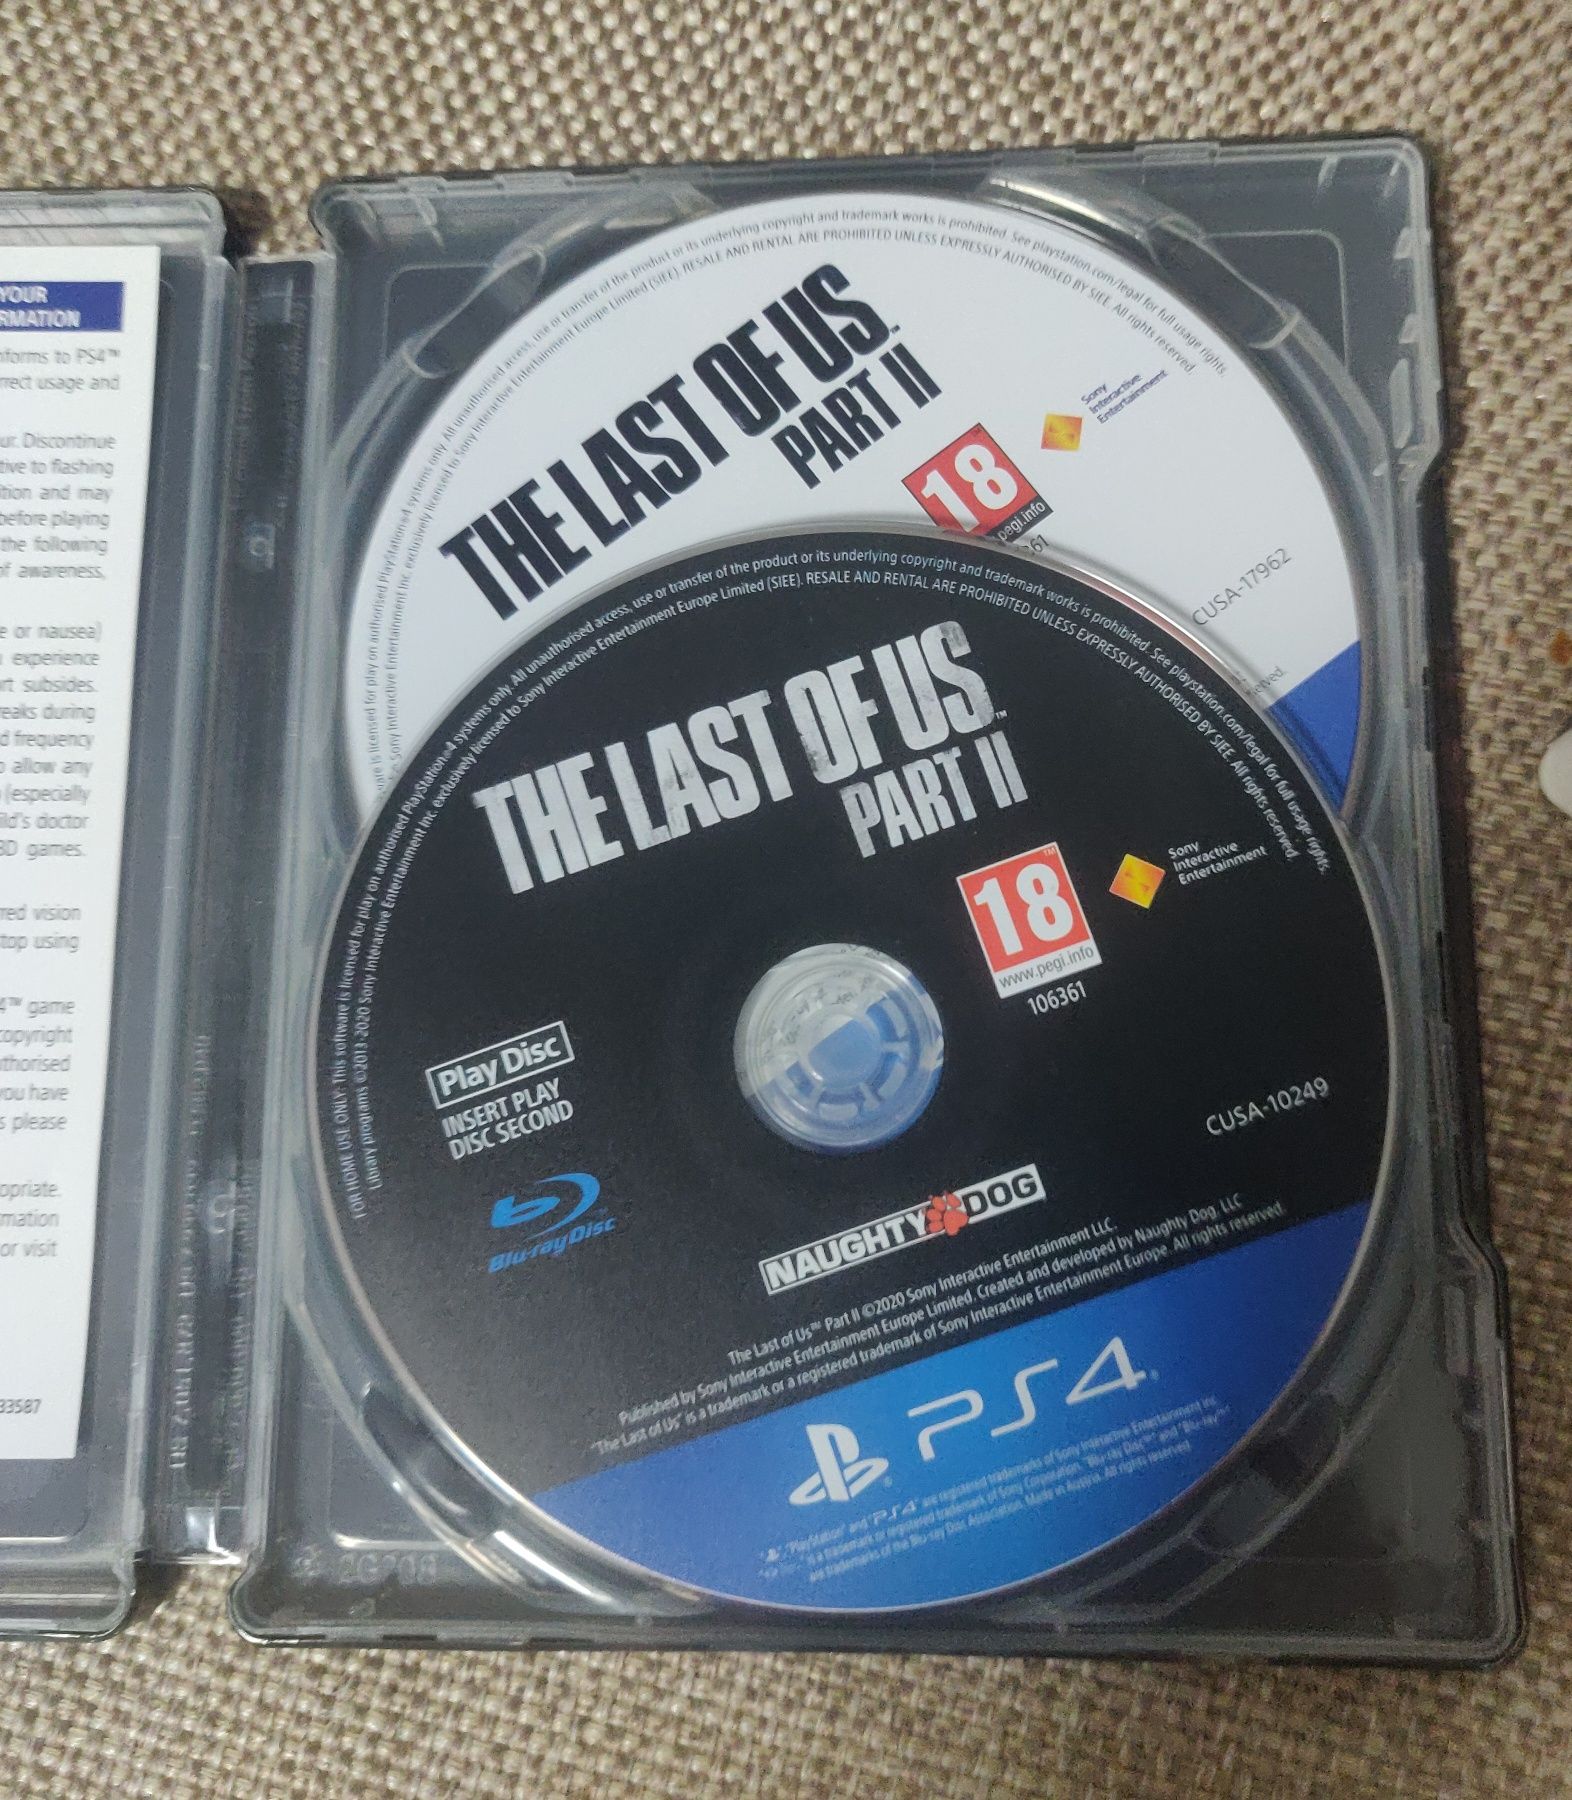 The last of us part 2 with limited edition steelbook